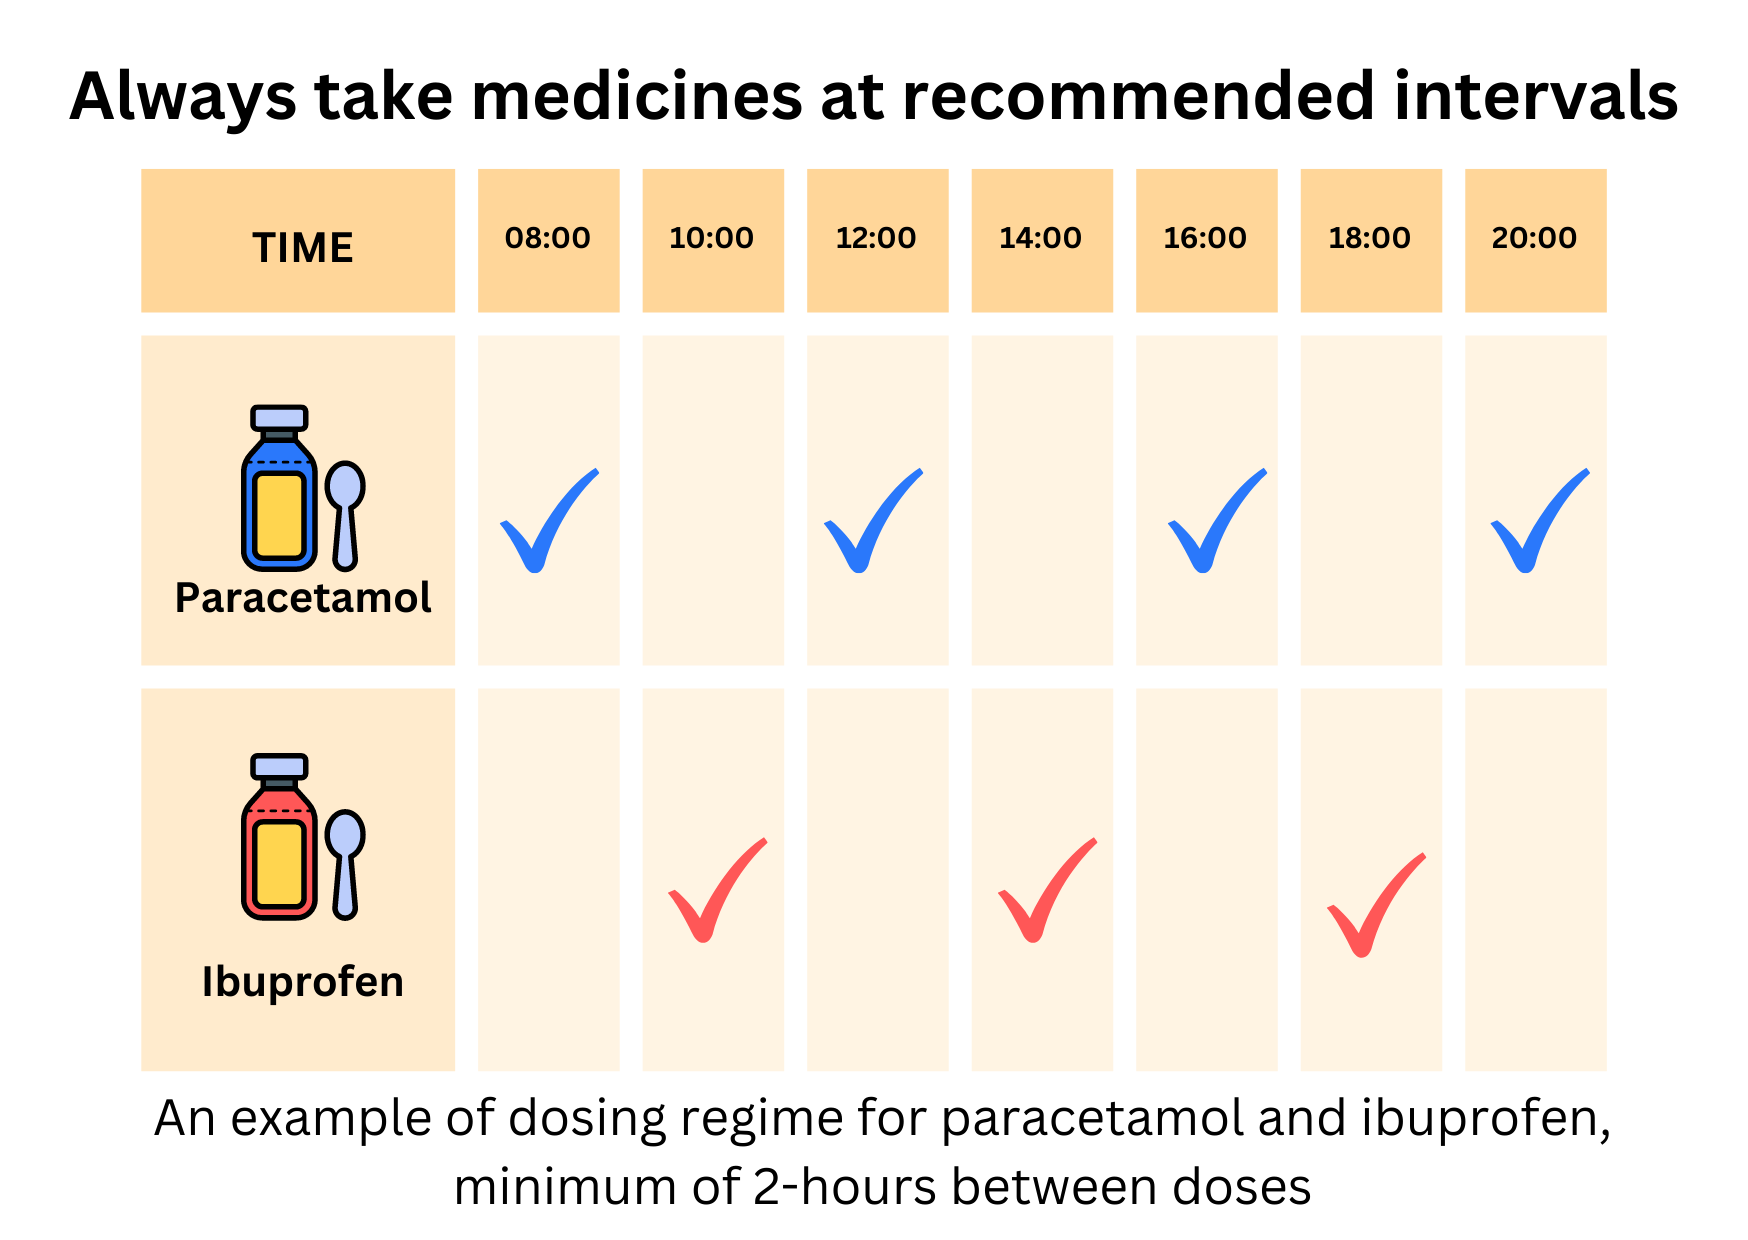 An image of an ibuprofen and paracetamol dosing chart showing the appropriate times to take the medication (a minimum of 2 hours between doses)